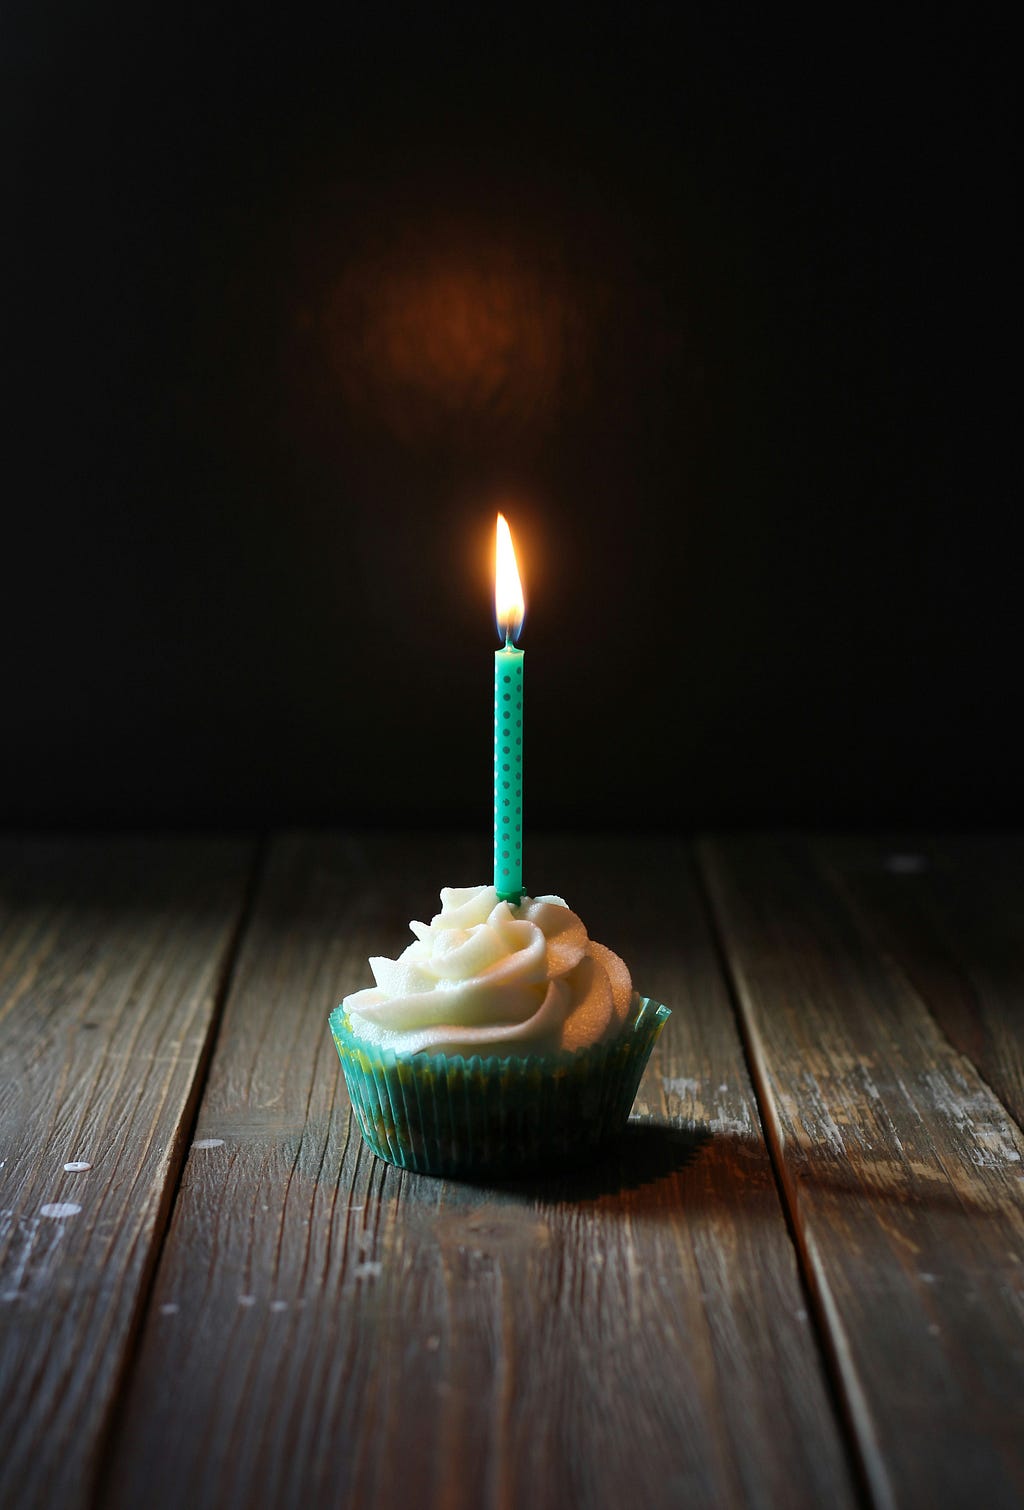 A single birthday cupcake with one lit candle.